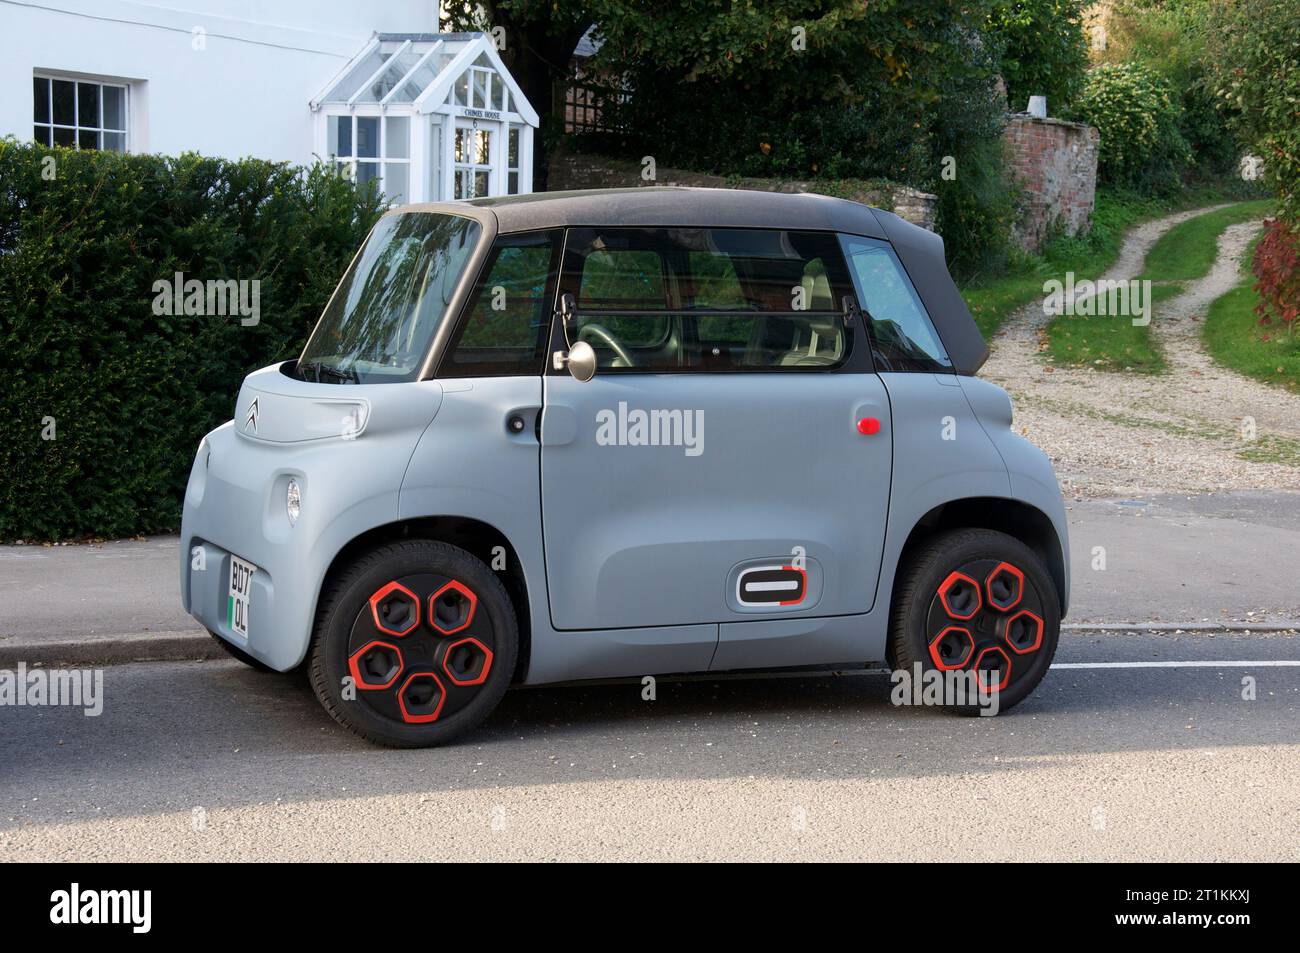 The Citroën Ami, this tiny French electric vehicle (EV), looks like a small car but is legally classified as a quadricycle. Ideal as an urban runabout. Stock Photo